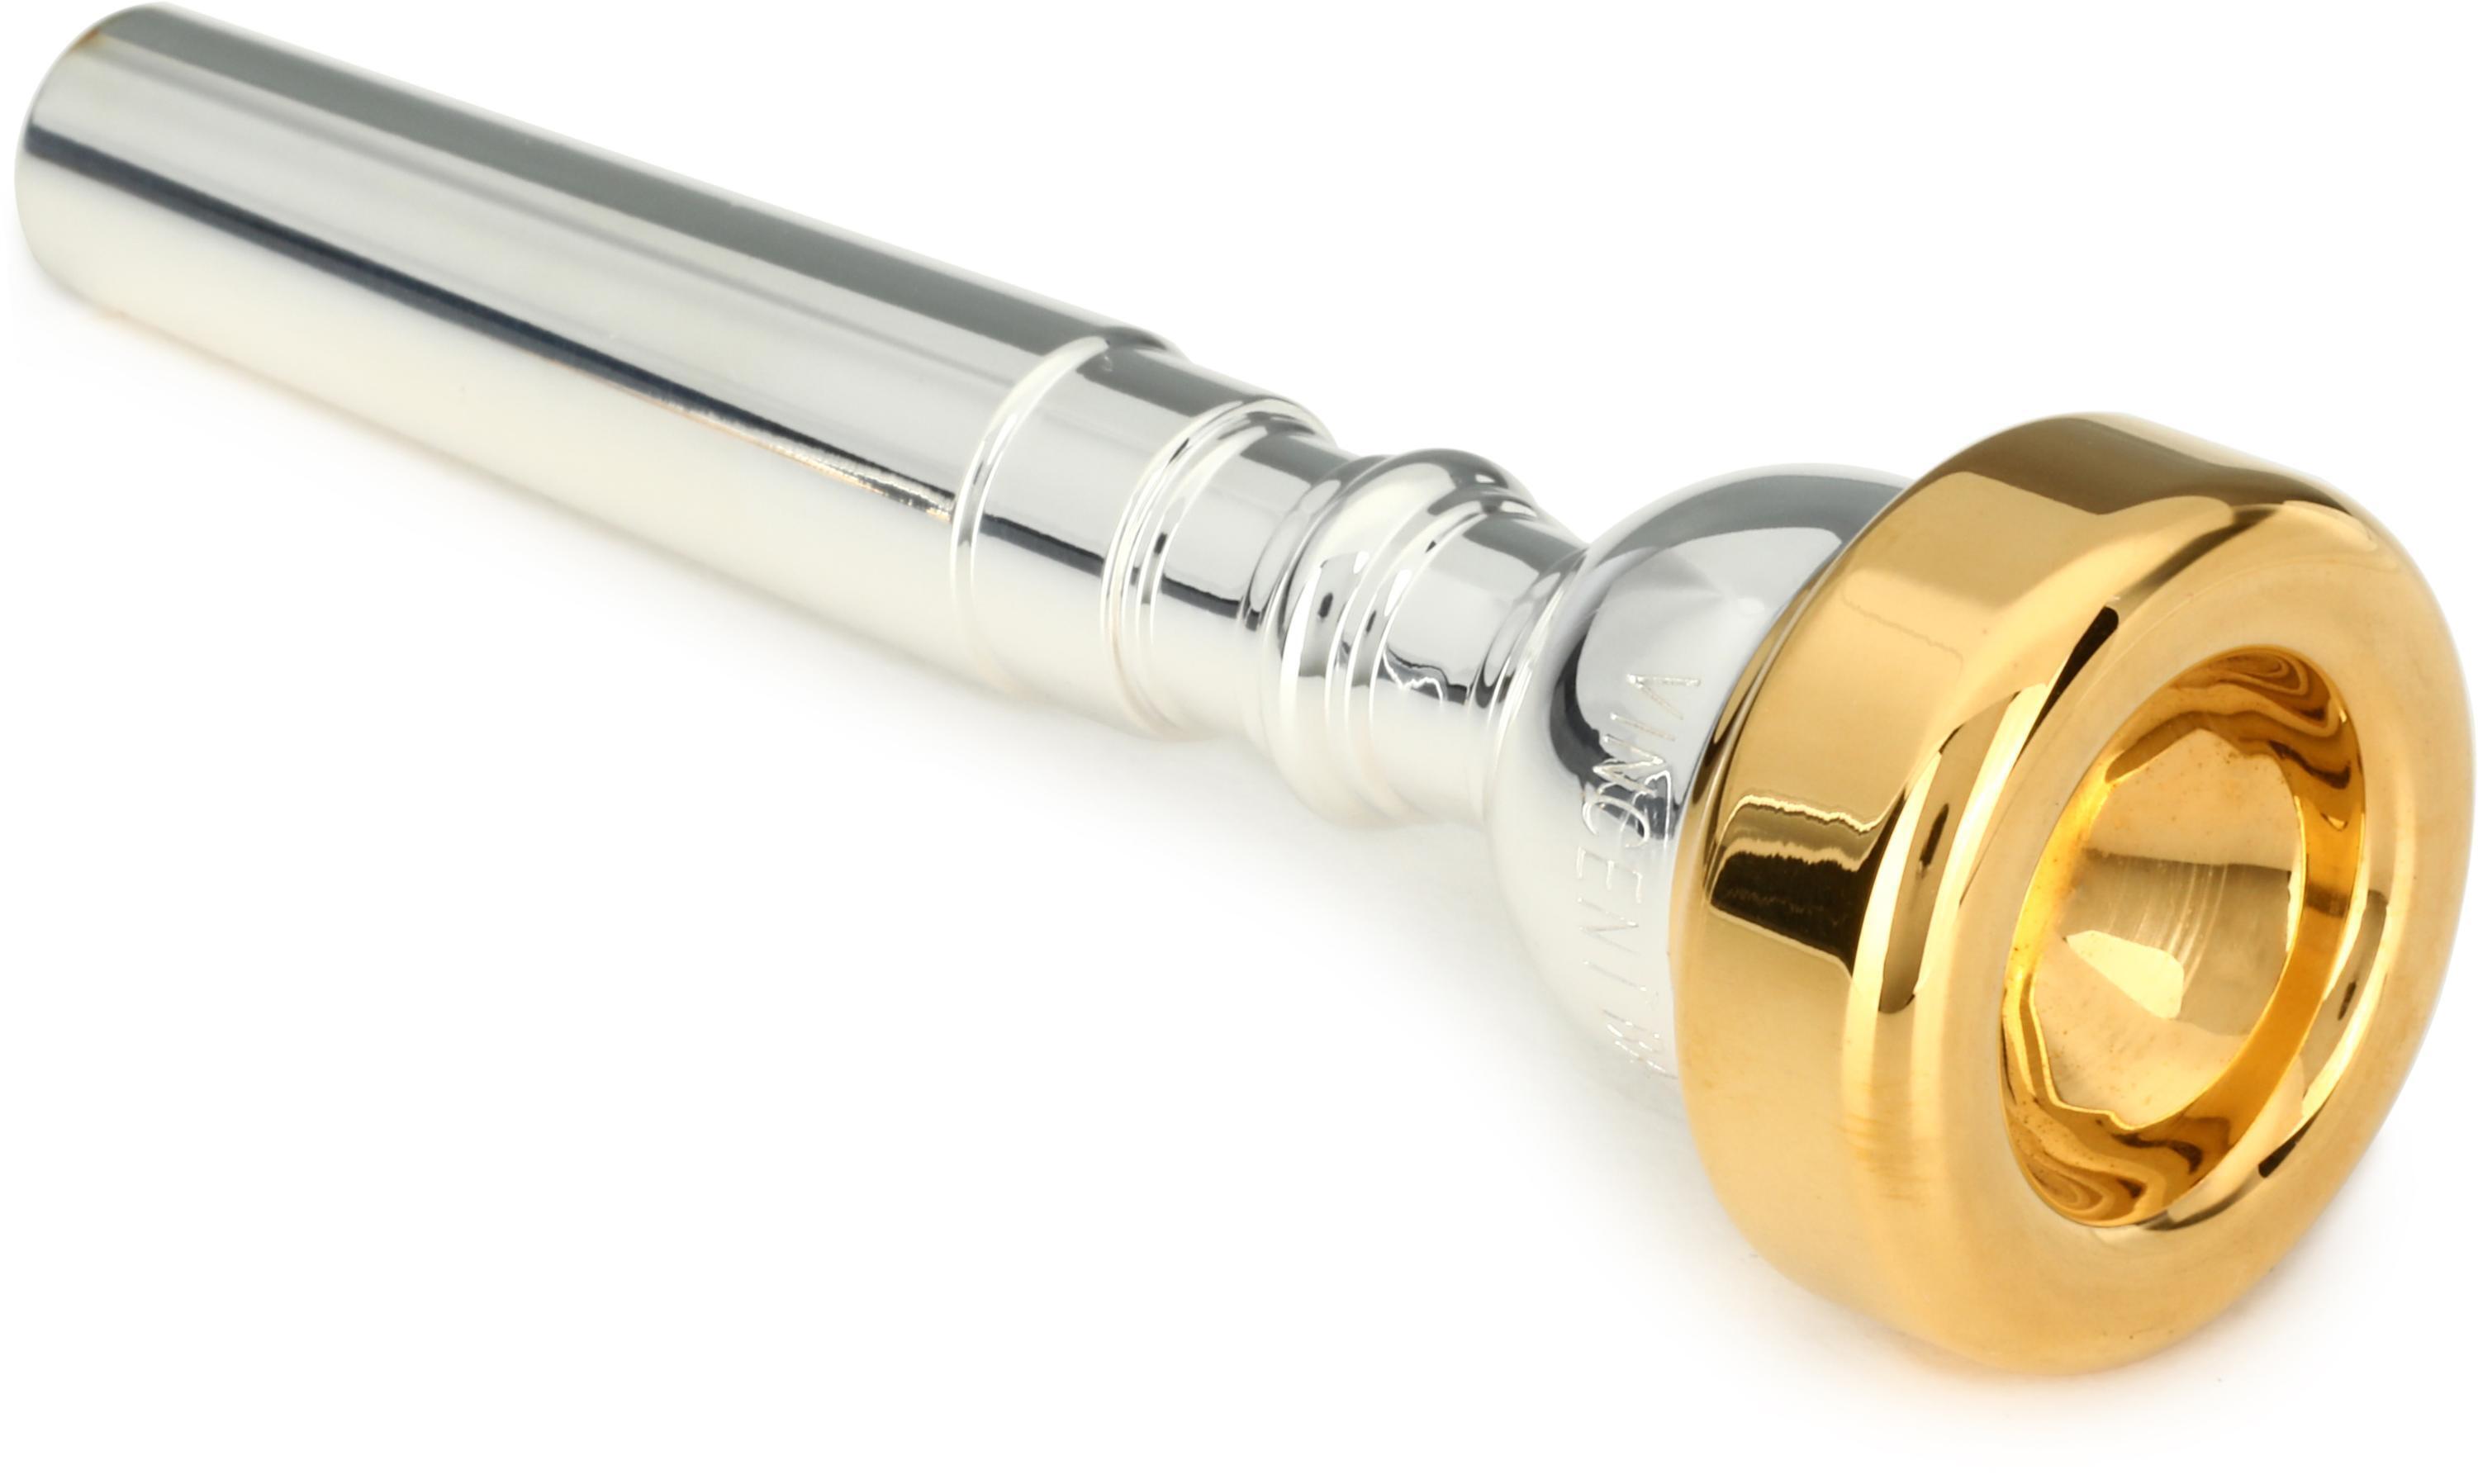 Bach 351 Classic Series Silver-plated Trumpet Mouthpiece with Gold